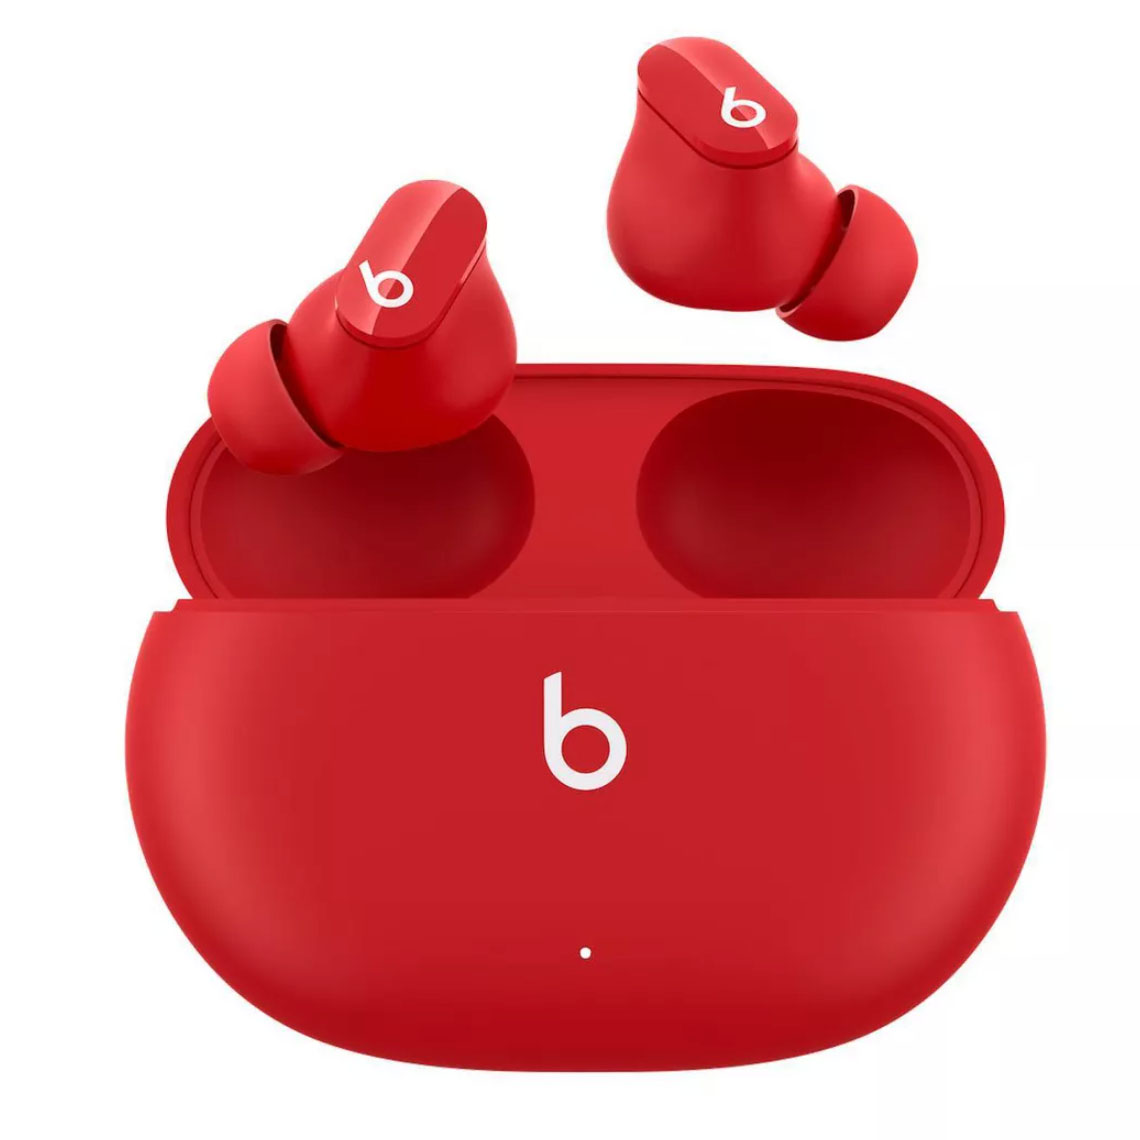 Red Beats earbuds in casing